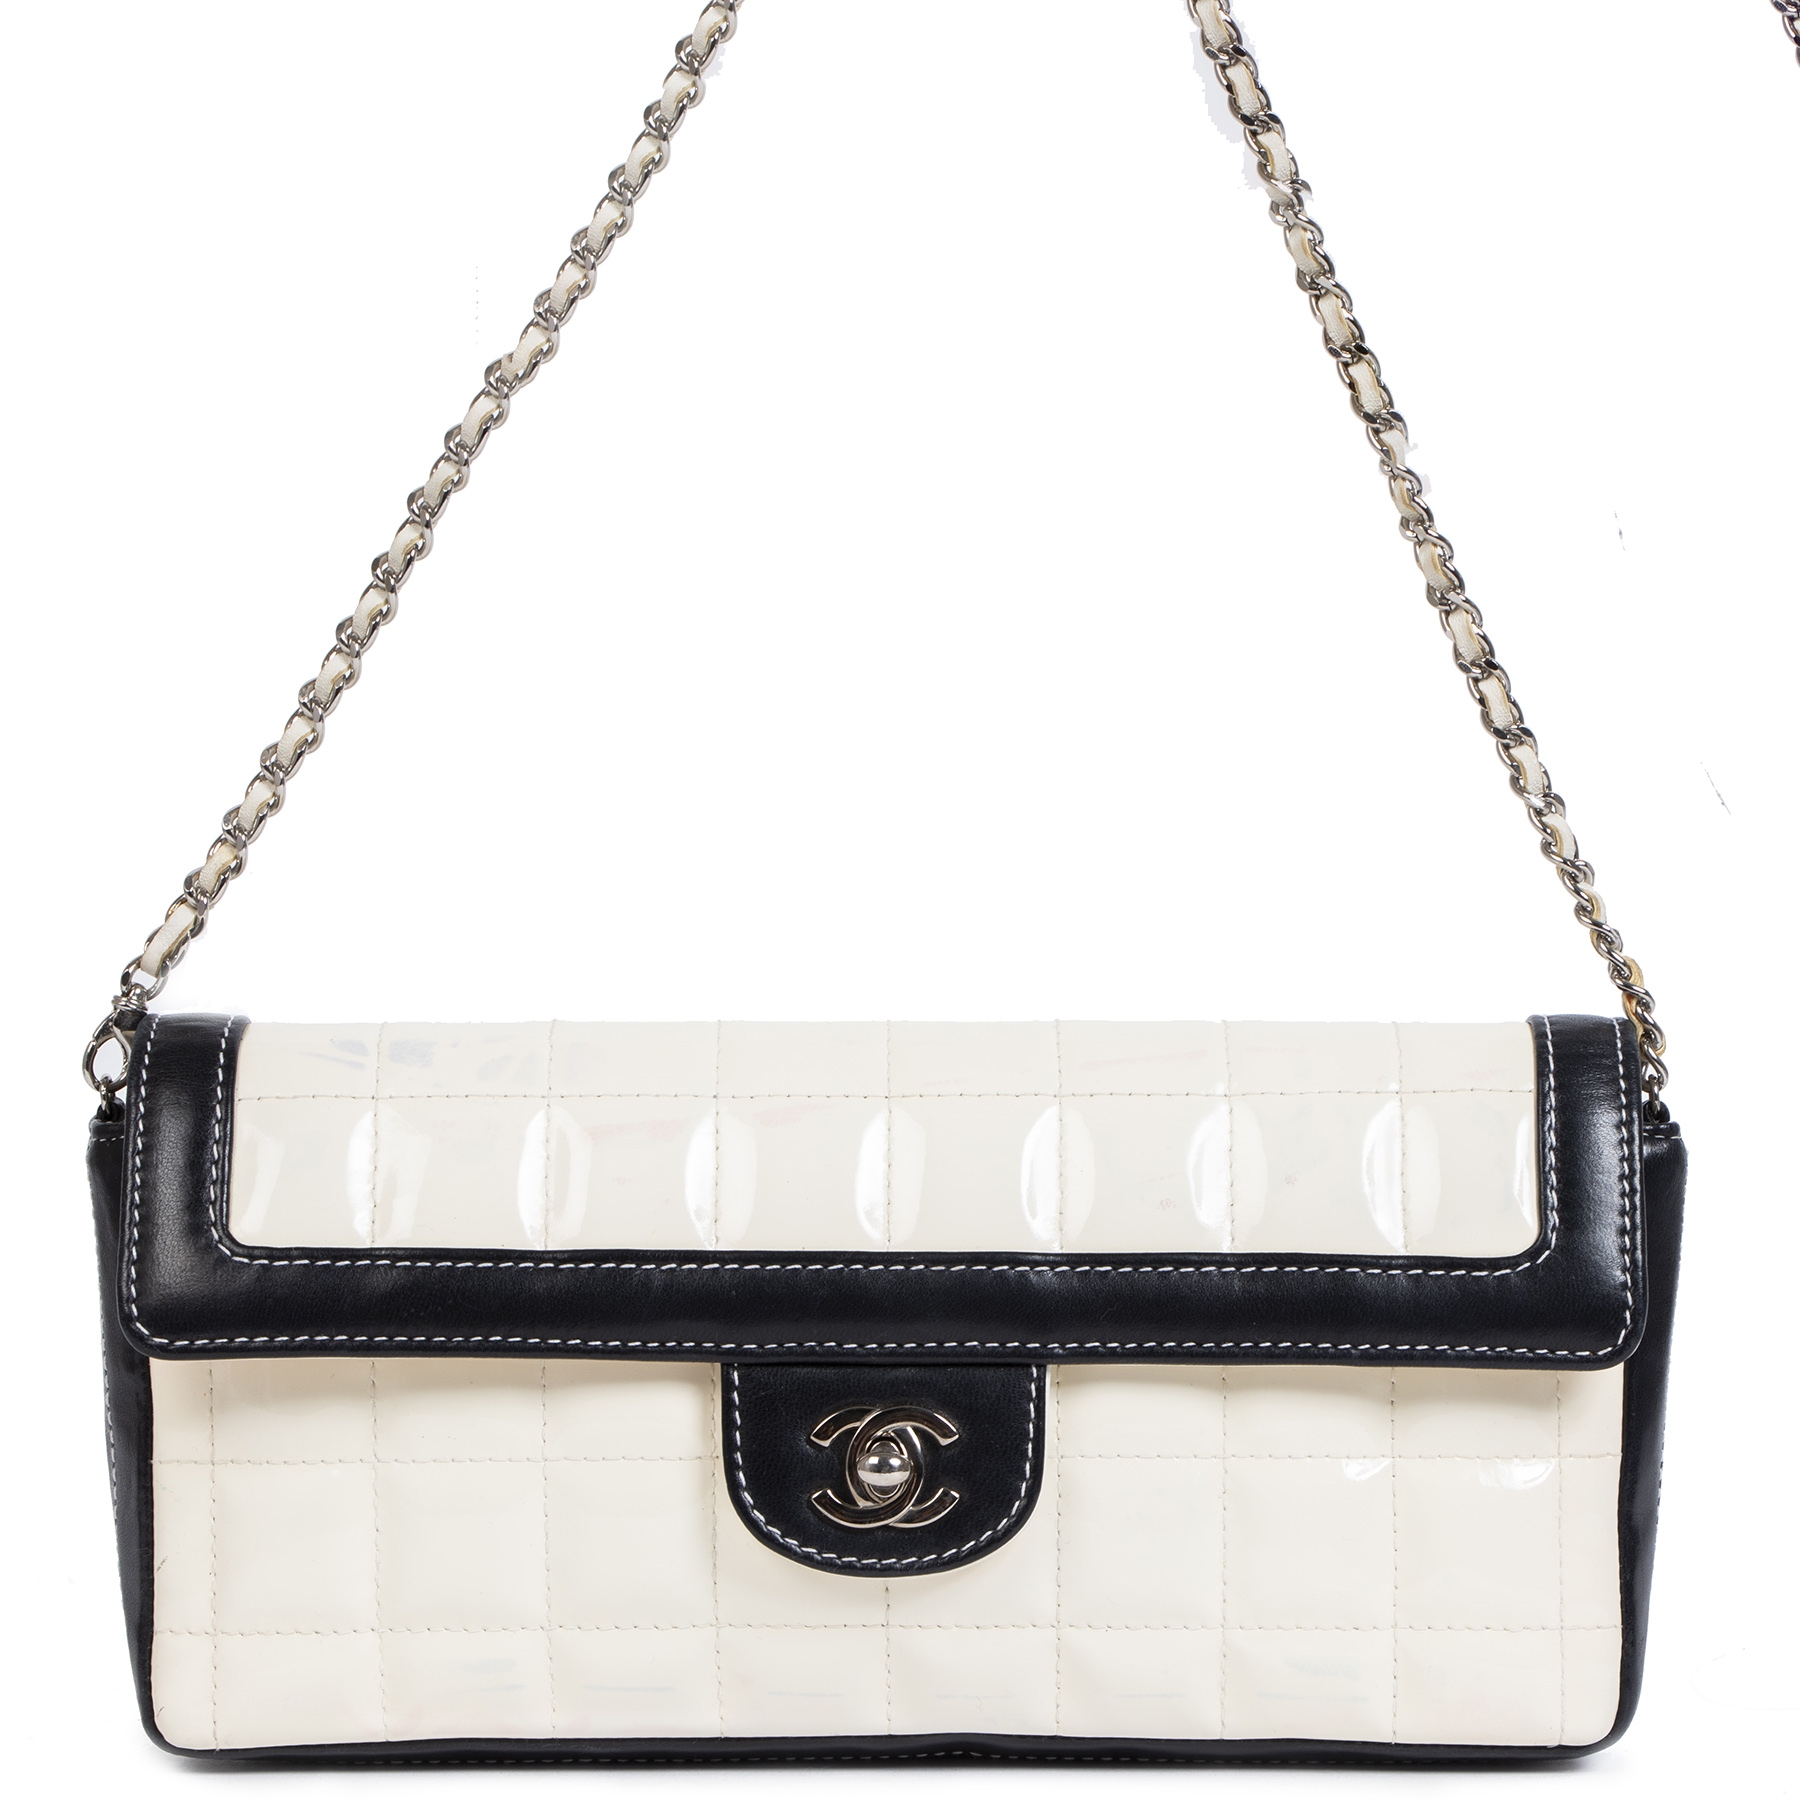 Sell Chanel Patent East West Flap Bag - Black/Nude